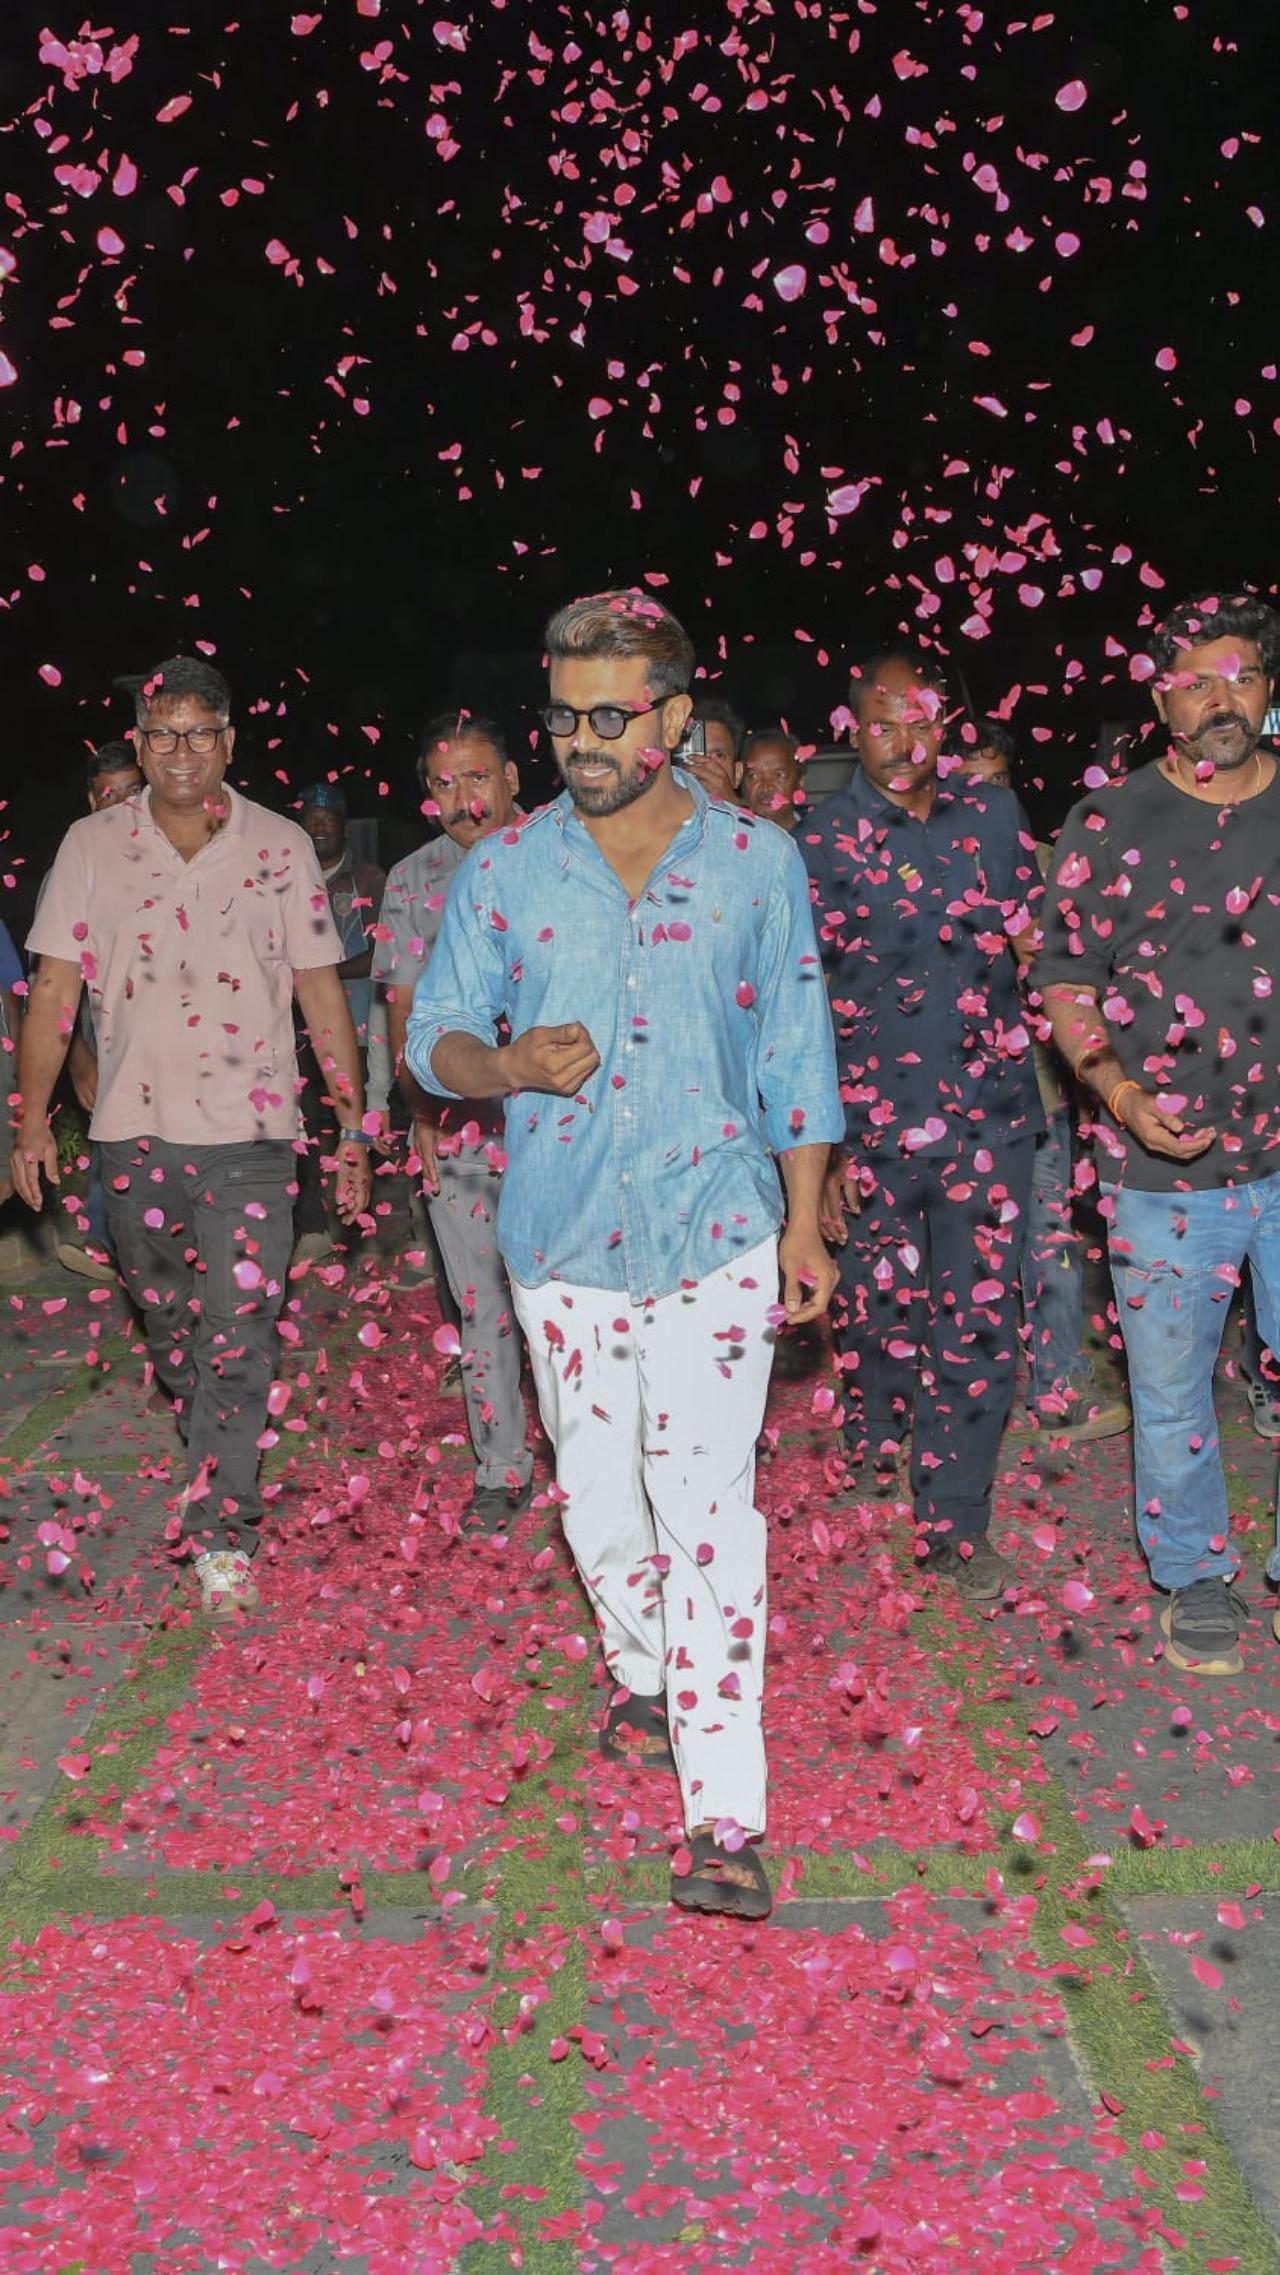 On Saturday, Ram celebrated his birthday on the sets and even had a cake-cutting ceremony. He was showered with rose petals. He was joined by Kiara, director S Shankar and choreographer-actor Prabhu Deva